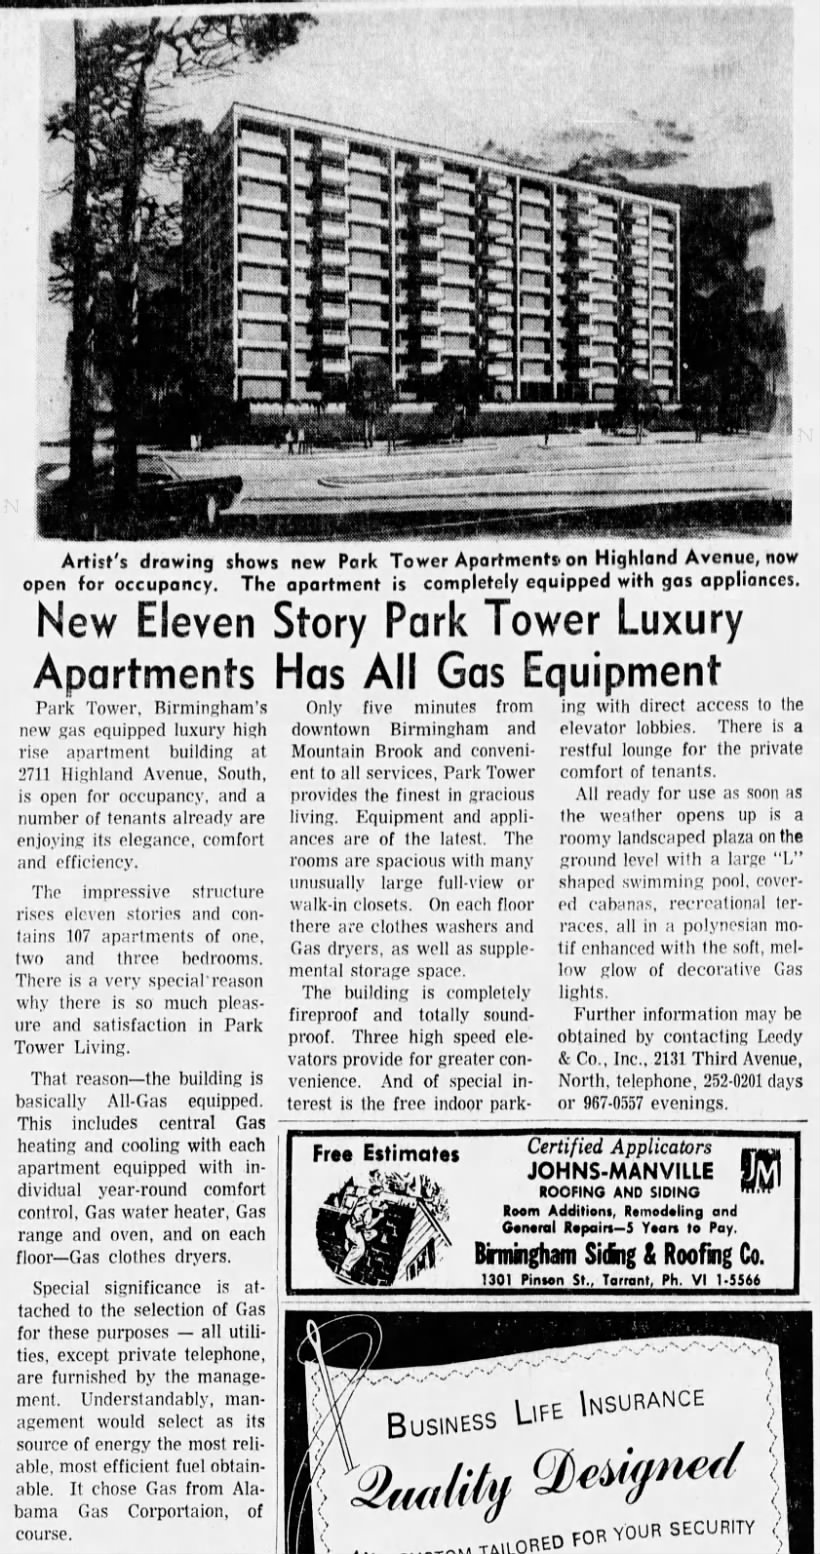 New Eleven Story Park Tower Luxury Apartments Has All Gas Equipment